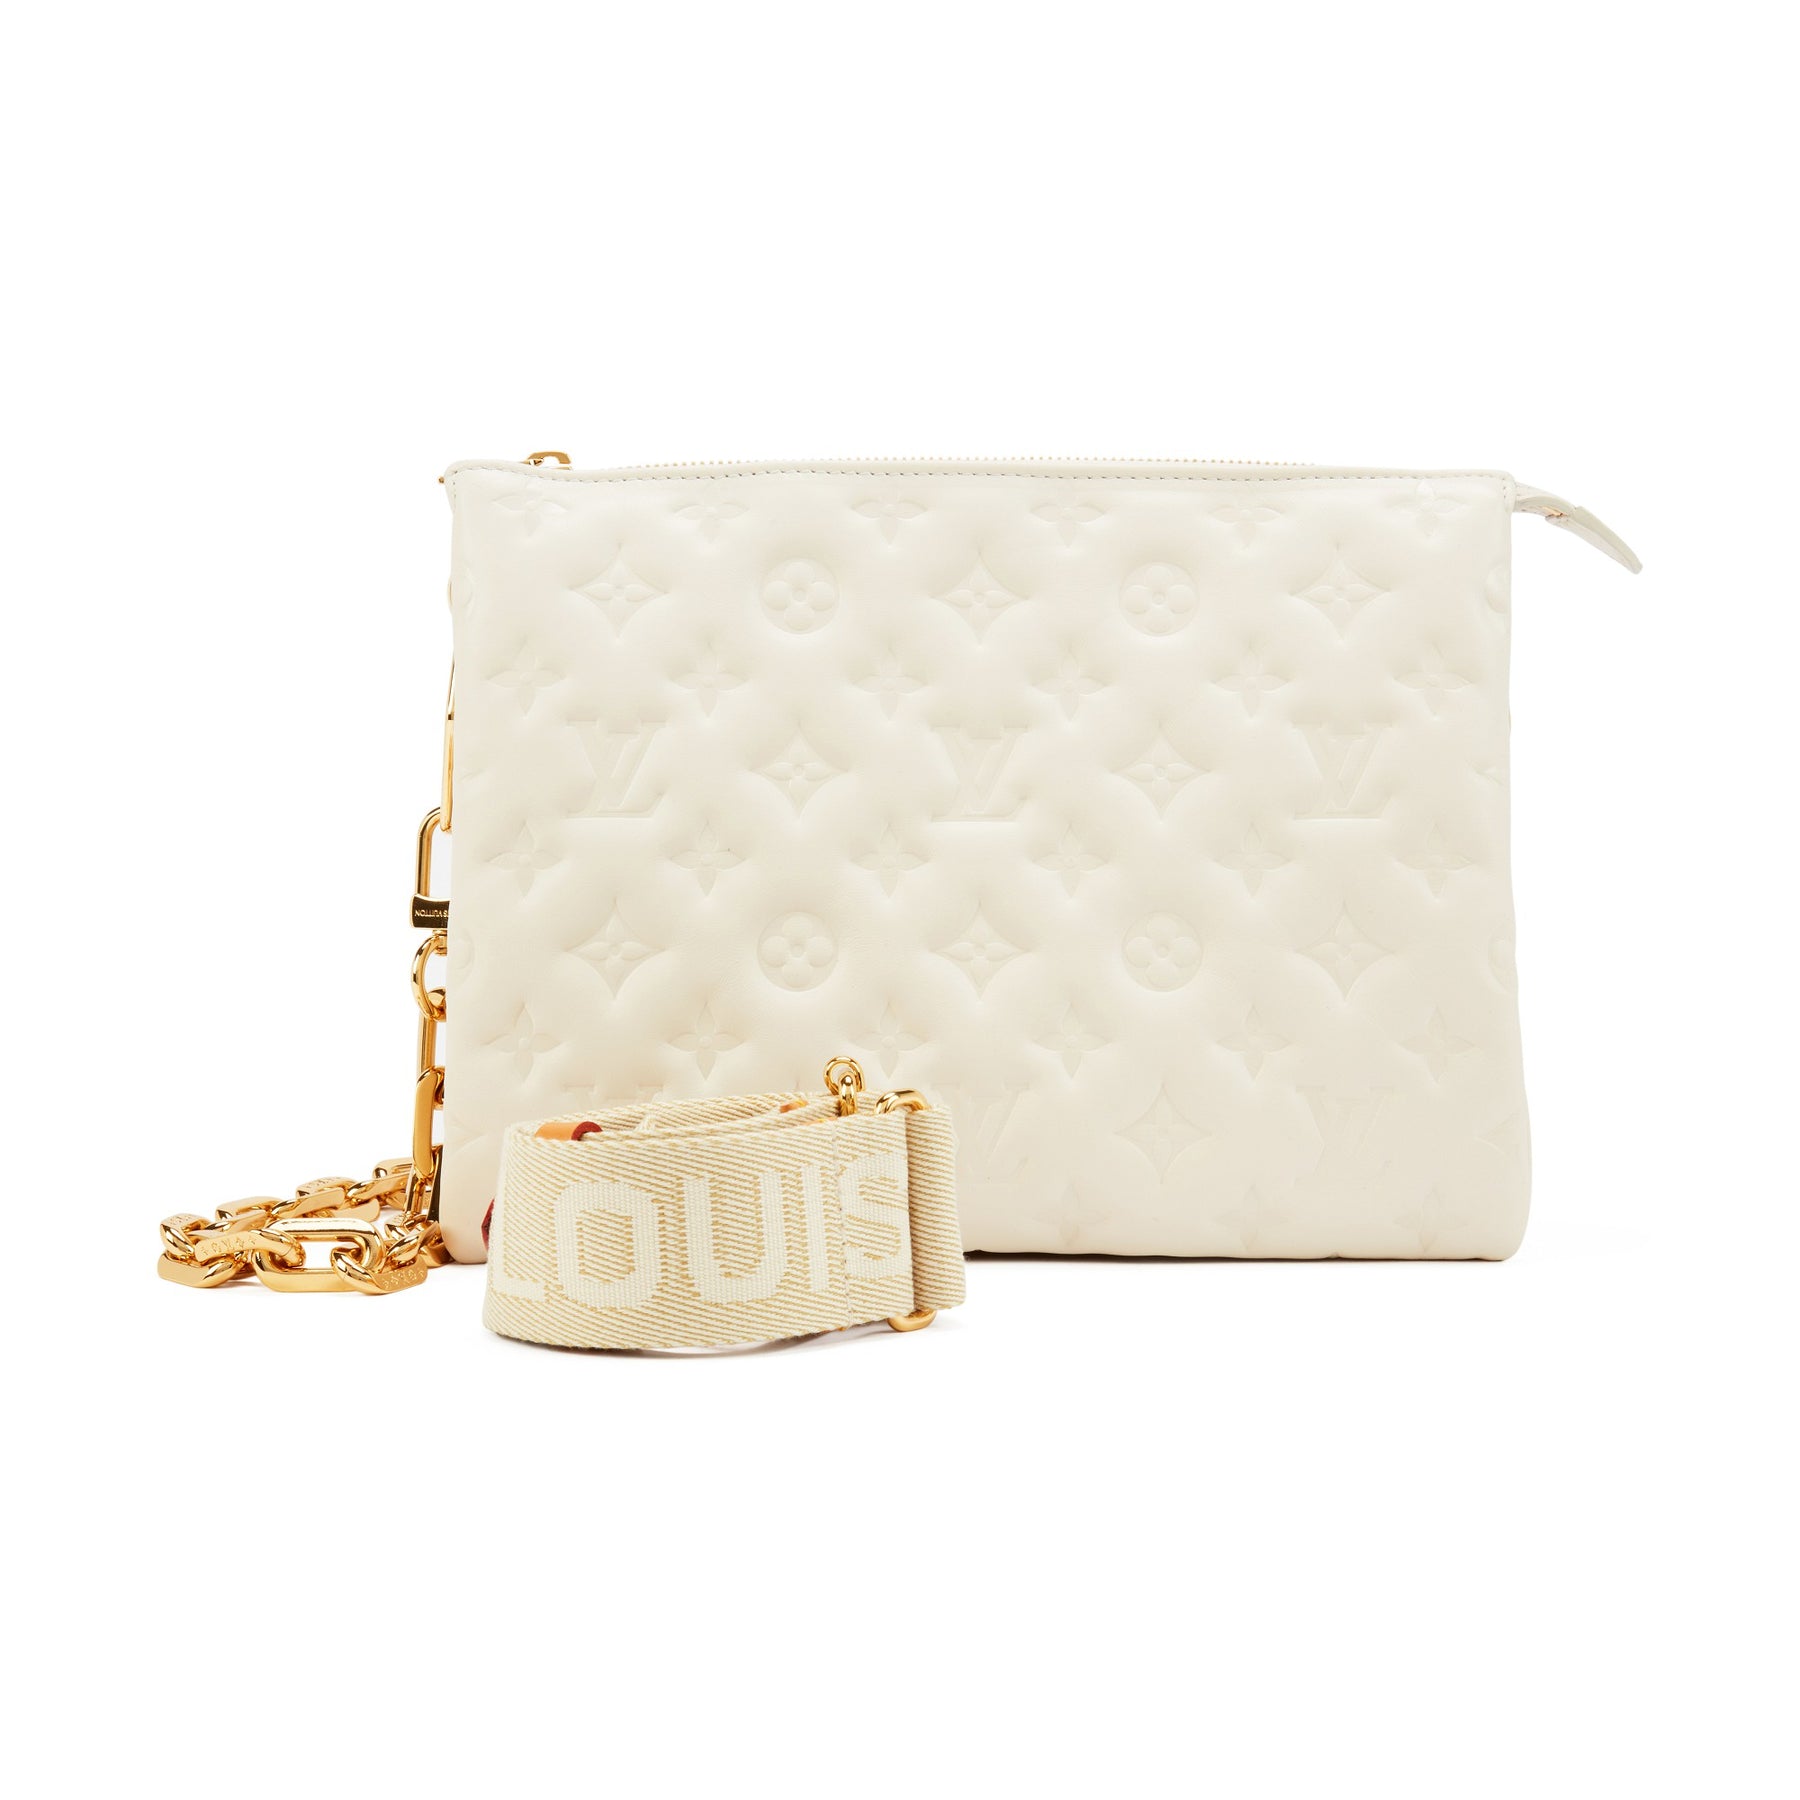 LOUIS VUITTON Coussin PM Monogram Embossed Leather Shoulder Bag White